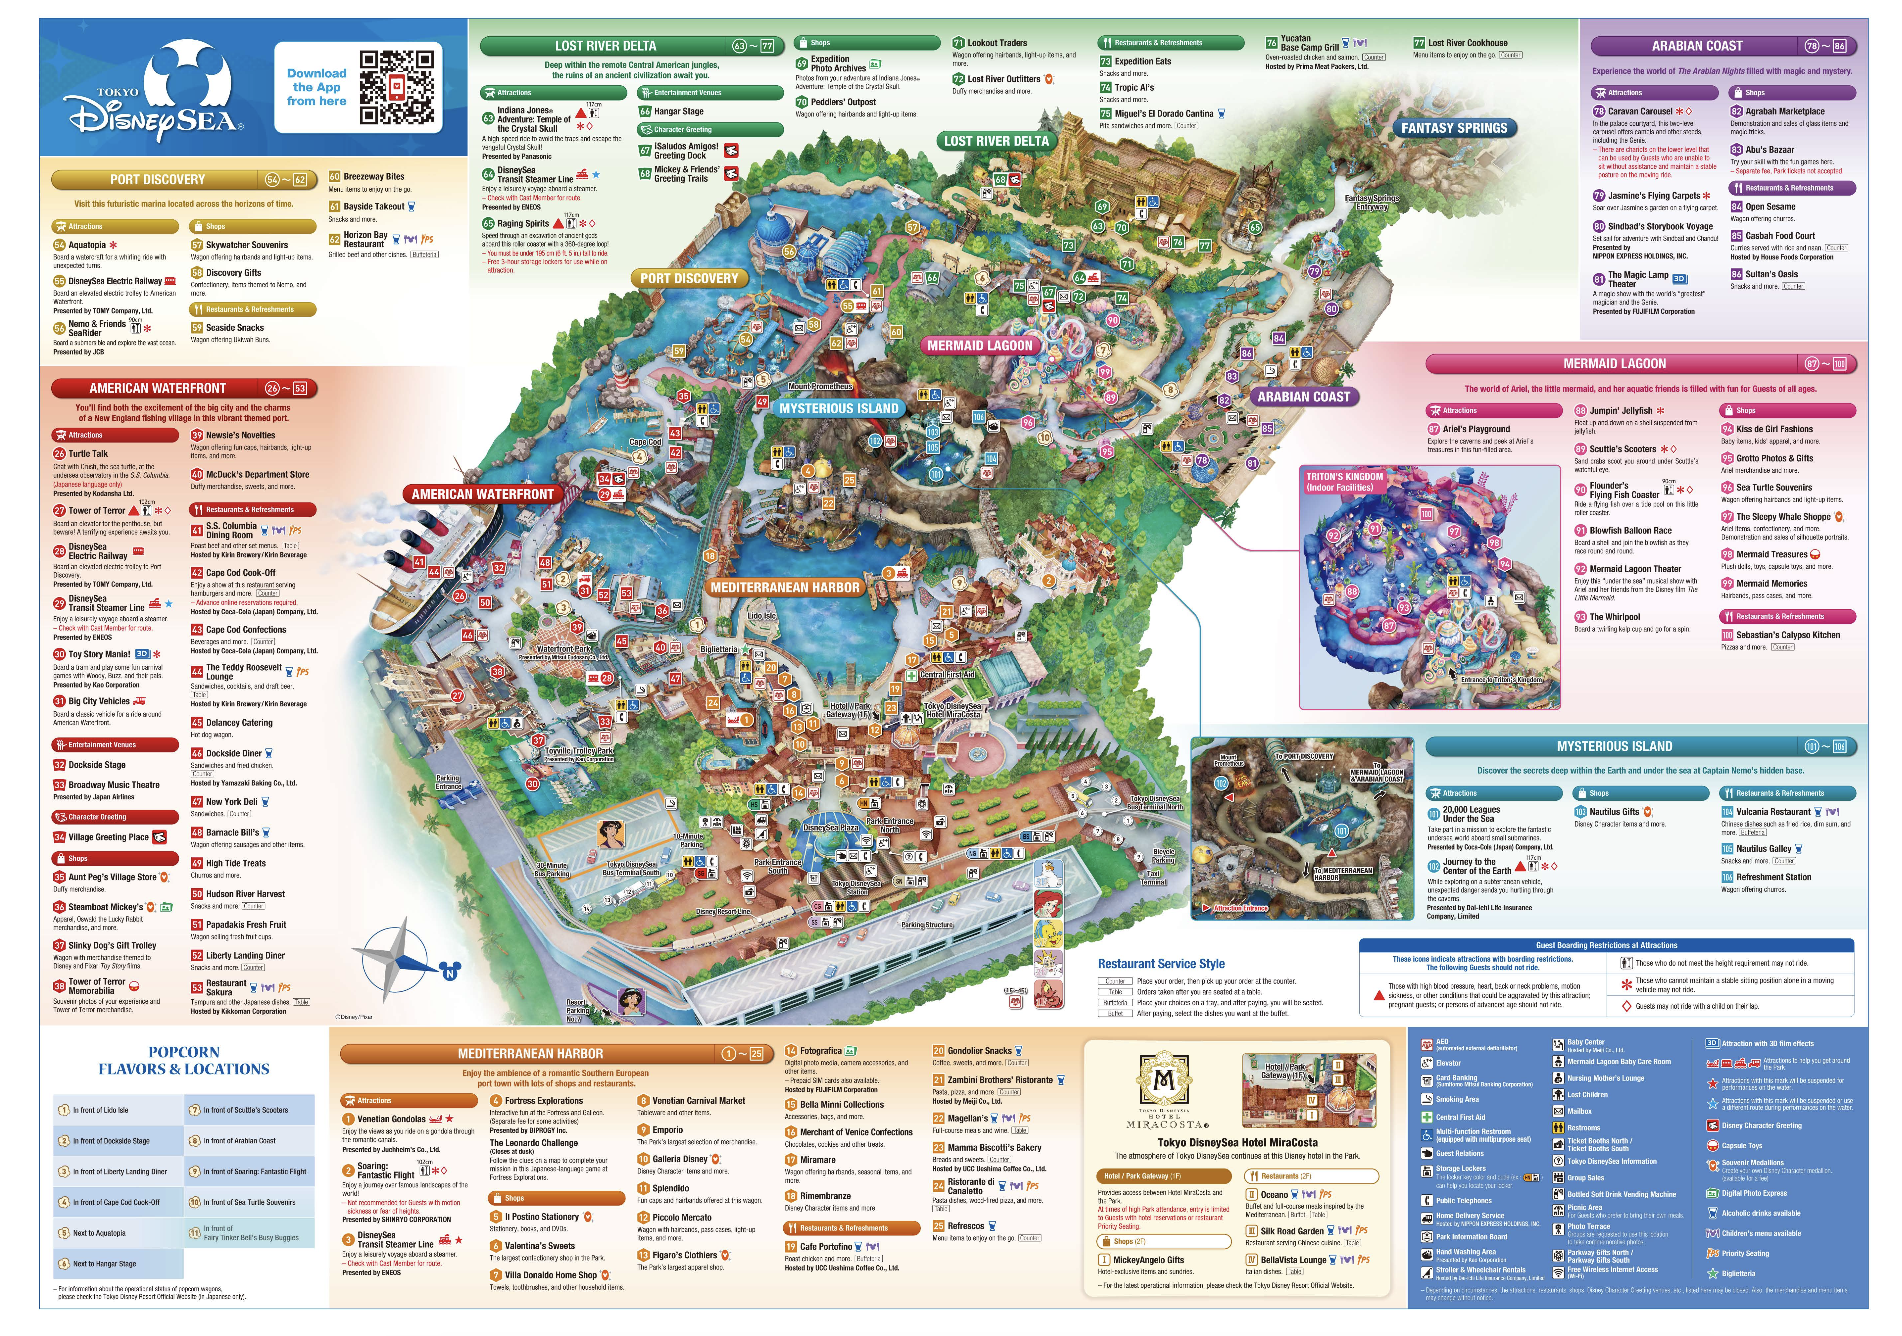 A detailed map of DisneySEA featuring themed areas like Mediterranean Harbor, American Waterfront, and Mysterious Island, highlighting attractions and amenities